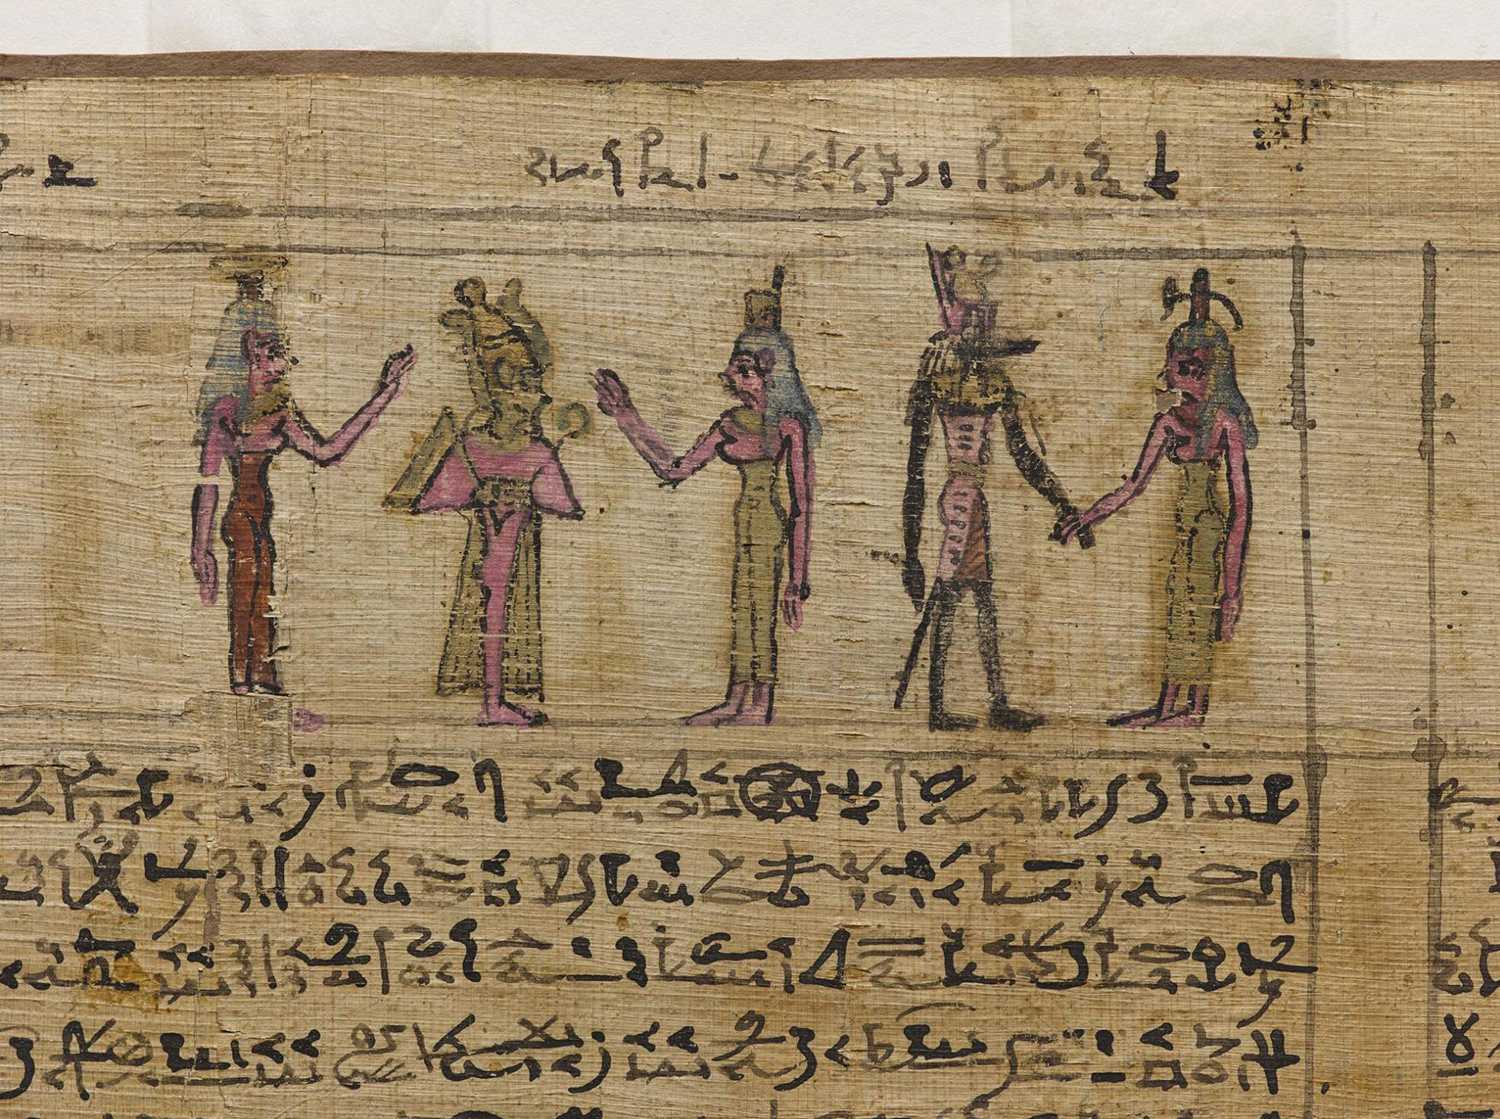 Detail of the funerary papyrus of Tanuat, wife of Montsuef, written in demotic and hieratic scripts on a roll of papyrus and illustrated with coloured vignettes: Abd el-Qurna, Thebes, Egypt, 9 BC.